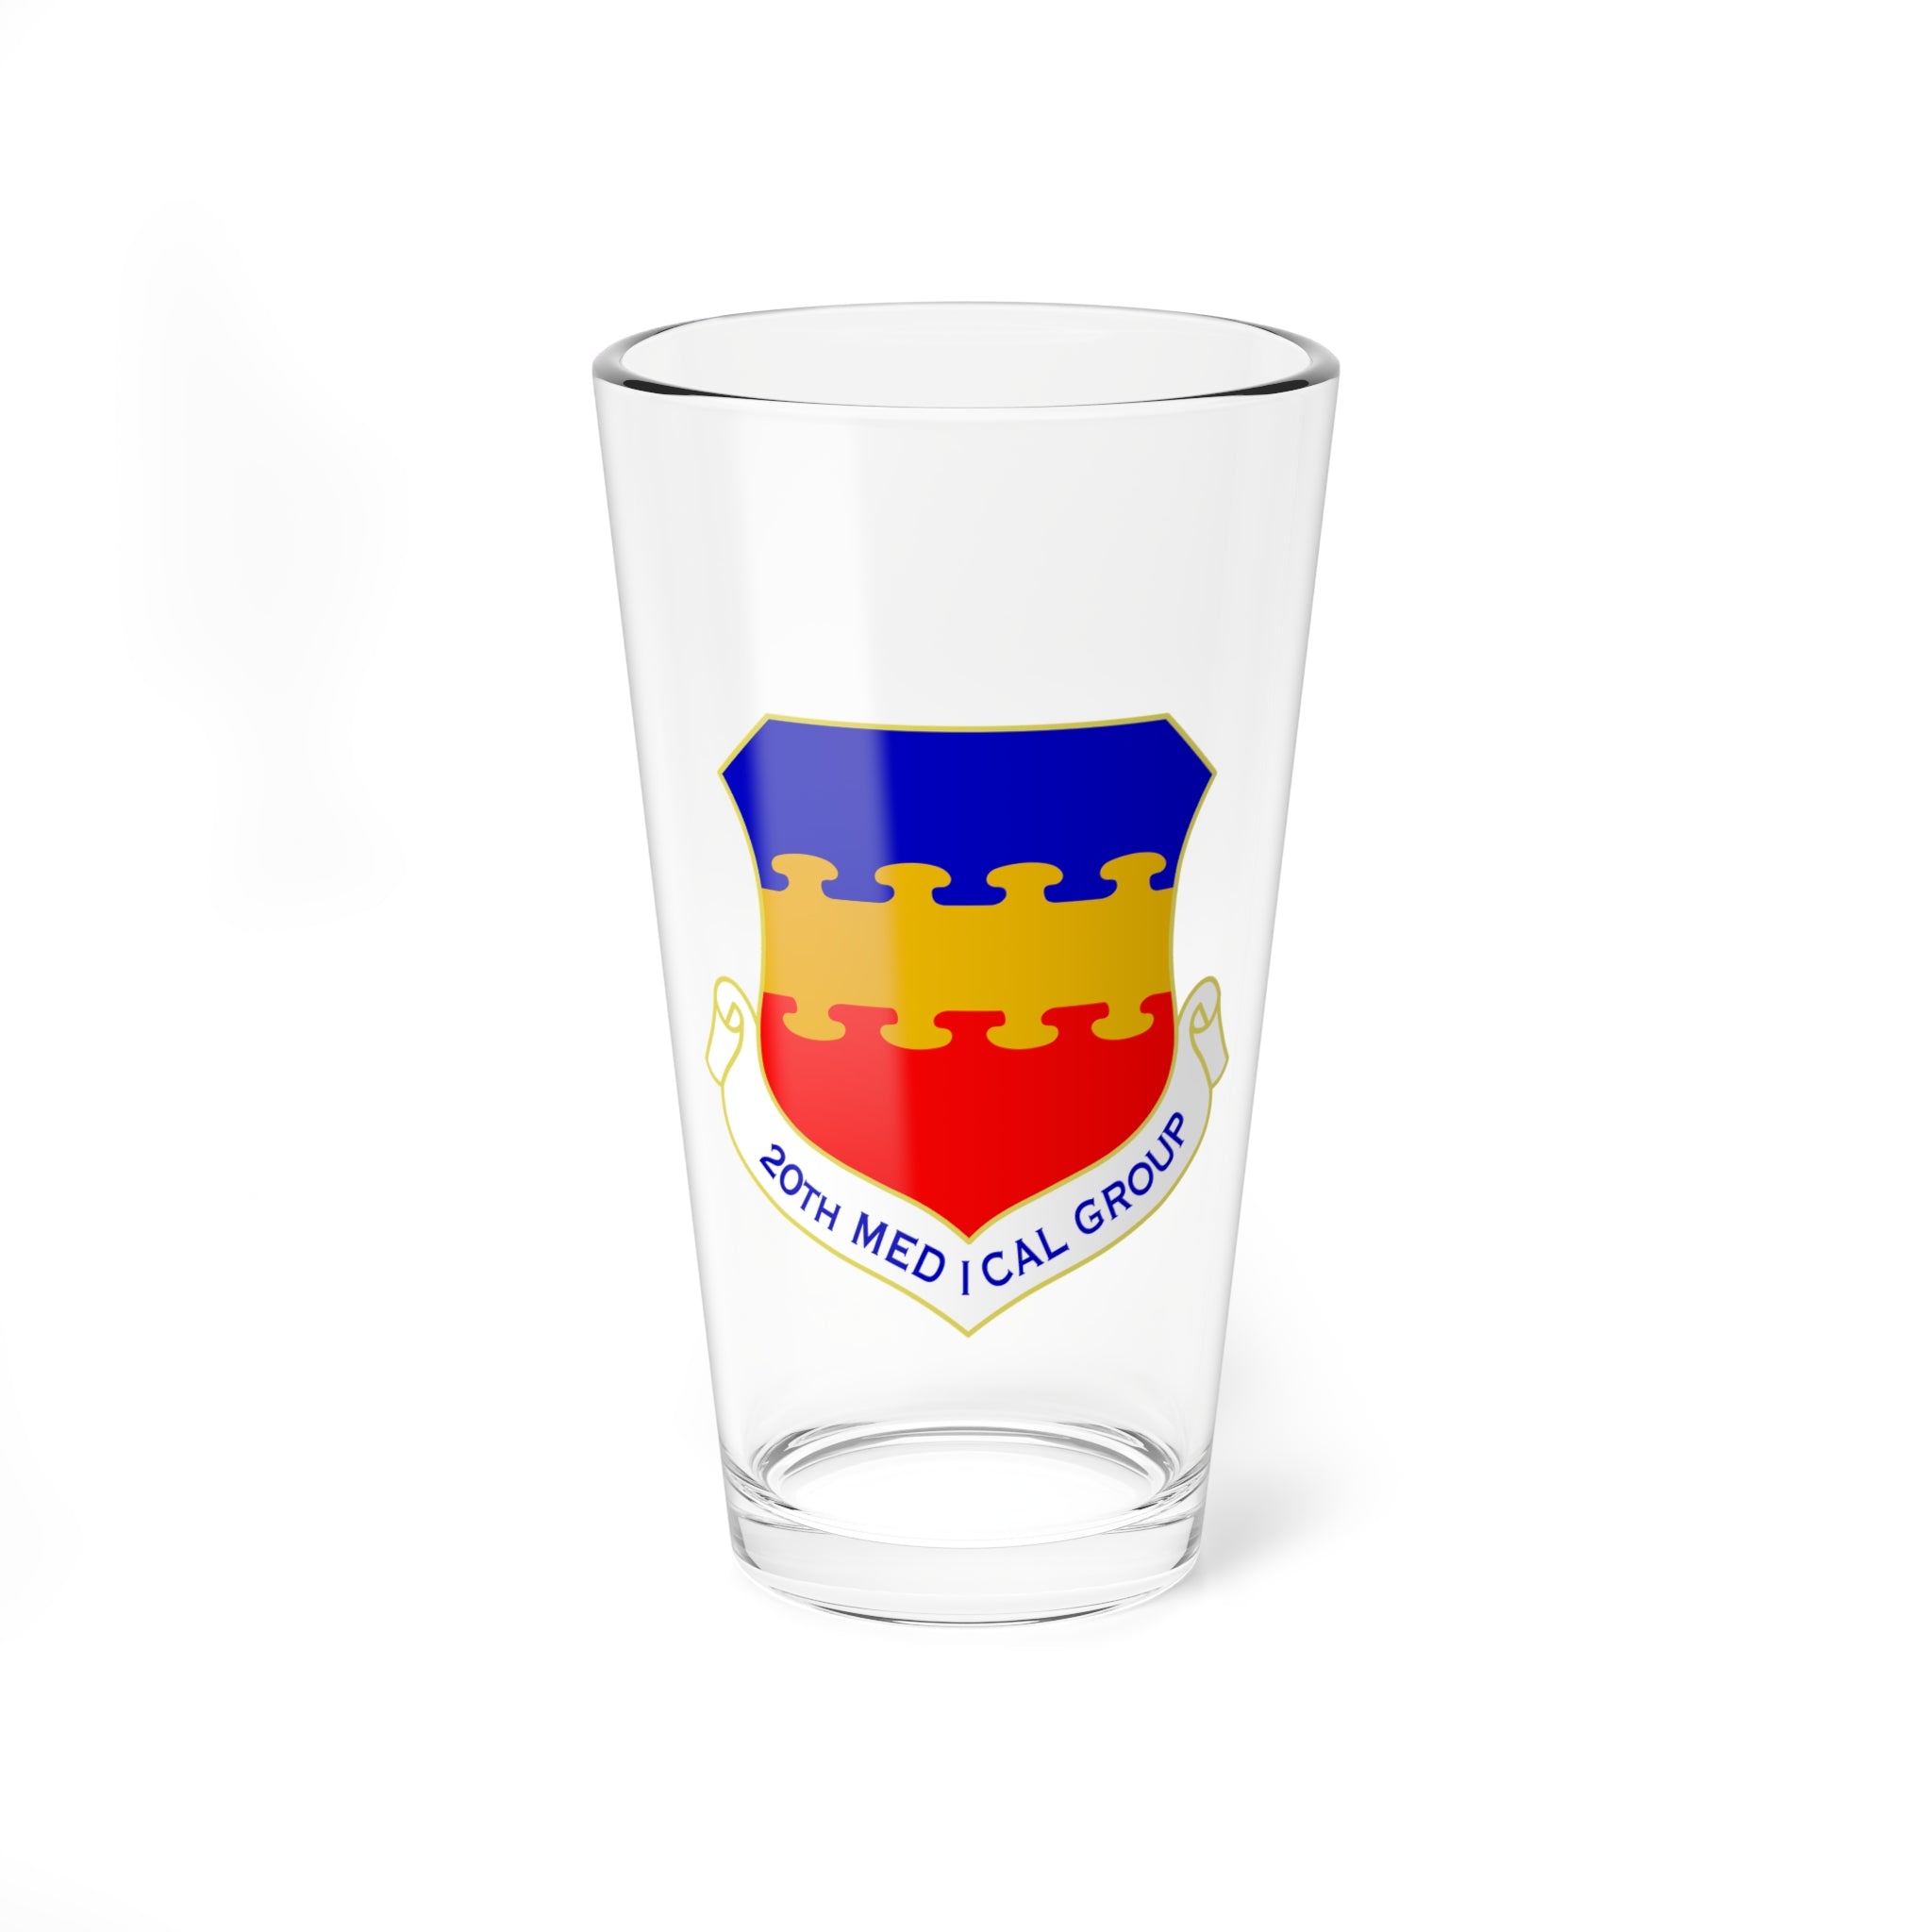 20th Medical Group Pint Glass, USAF Medical Group Based at Shaw AFB